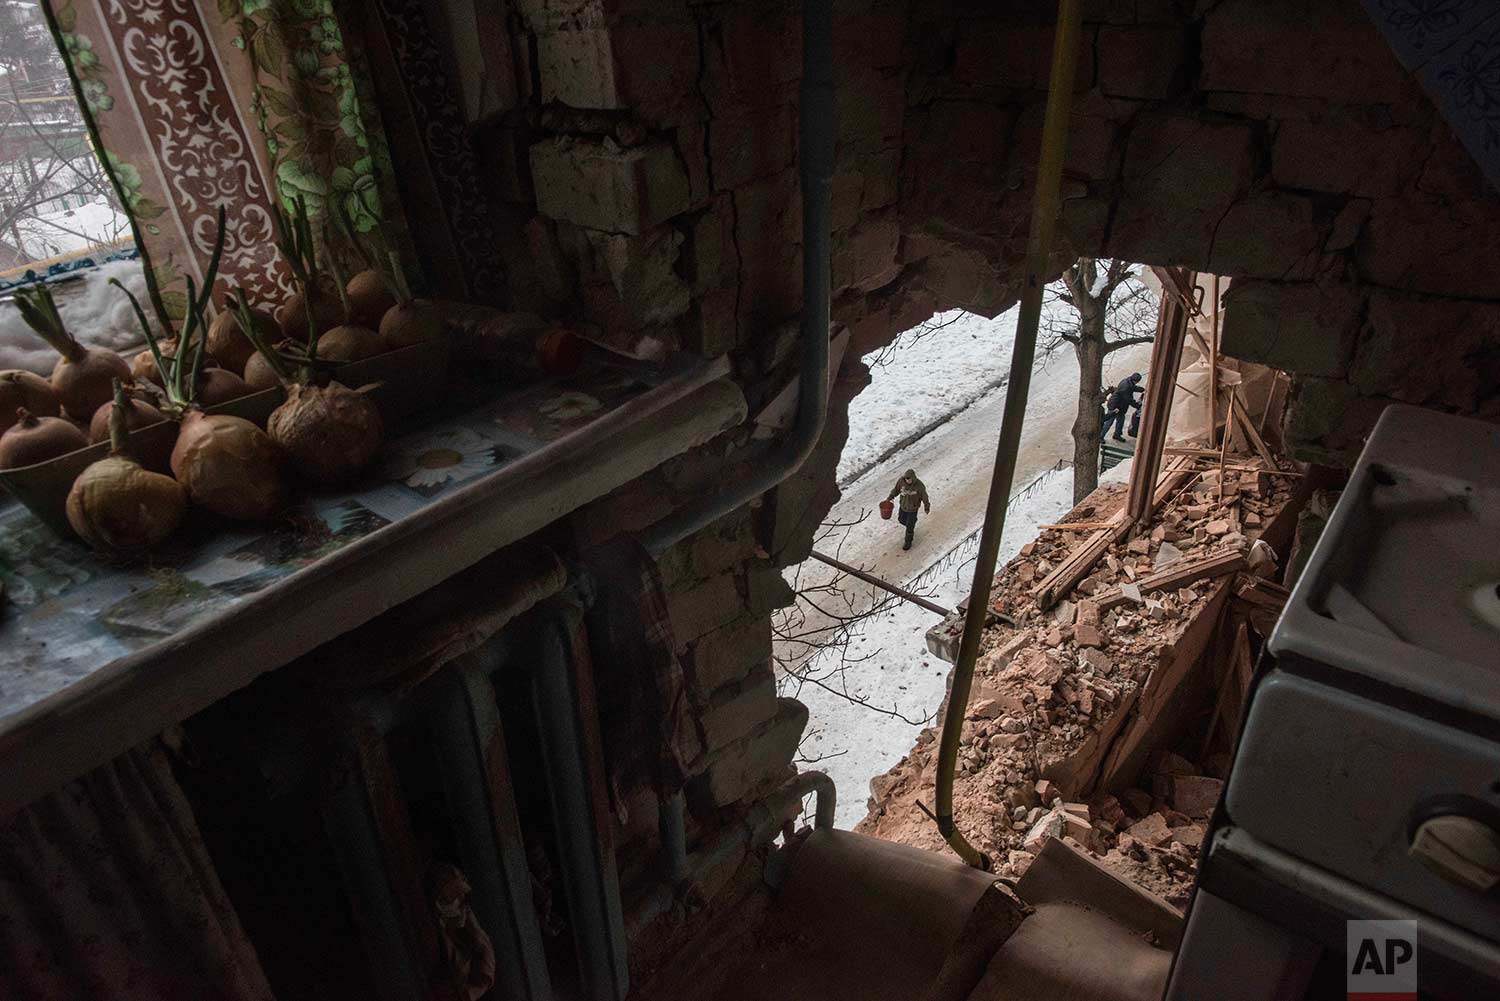  In this Saturday, Feb. 4, 2017 photo, a local resident walking in a street is seen through a hole in an apartment building damaged by shelling in Avdiivka, Ukraine. Fighting in eastern Ukraine sharply escalated this week. The Ukrainian command said 